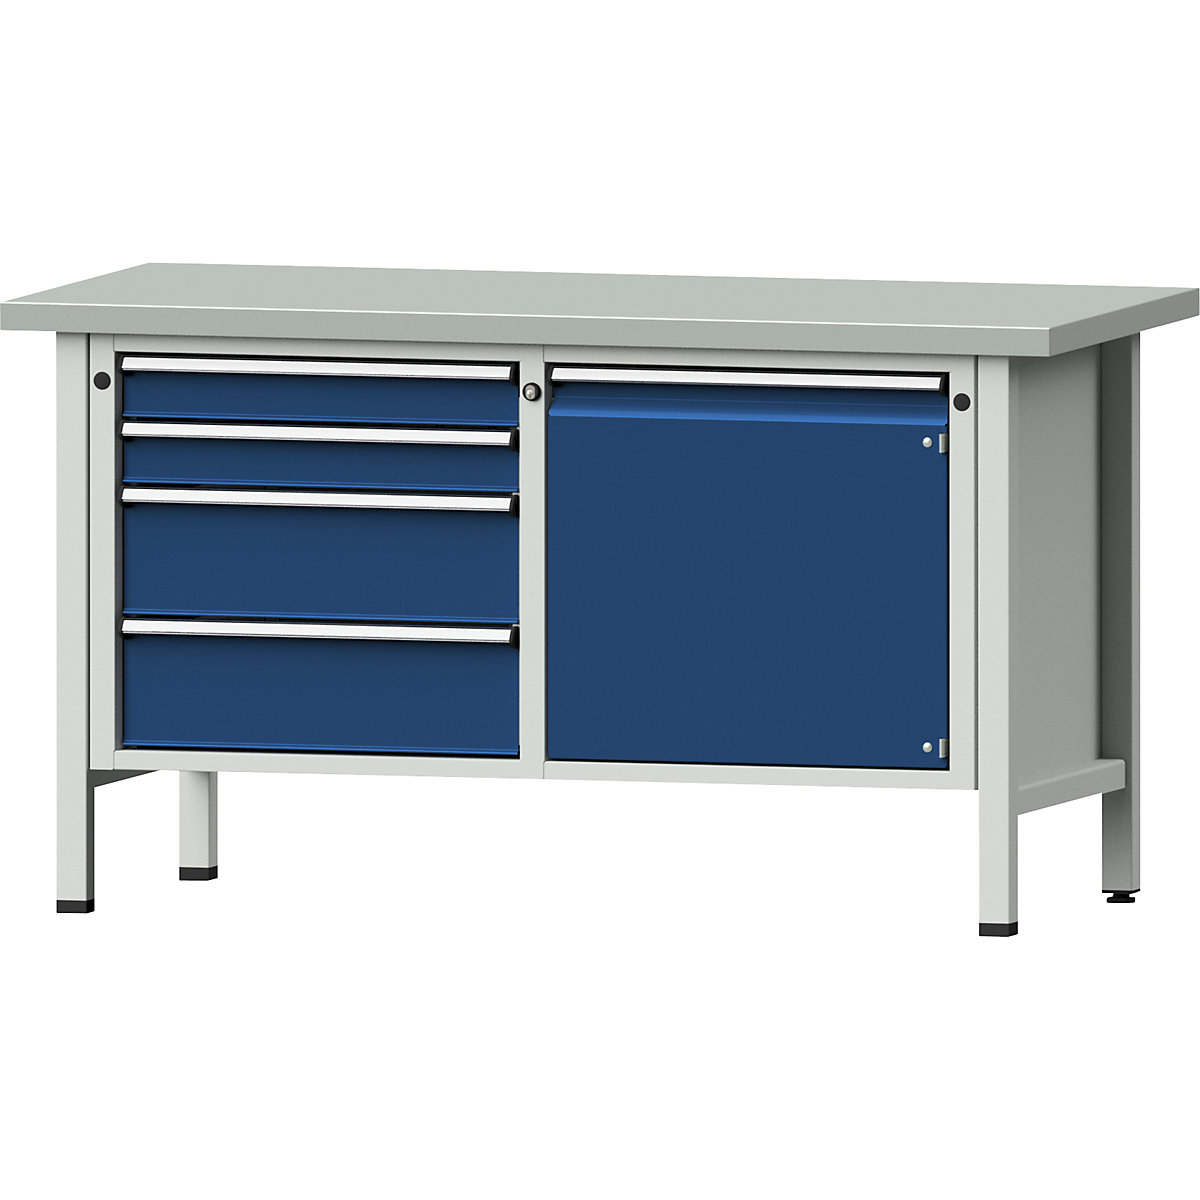 Workbench, frame construction – ANKE, 4 drawers, door 540 mm, sheet steel covering, partial extension-9